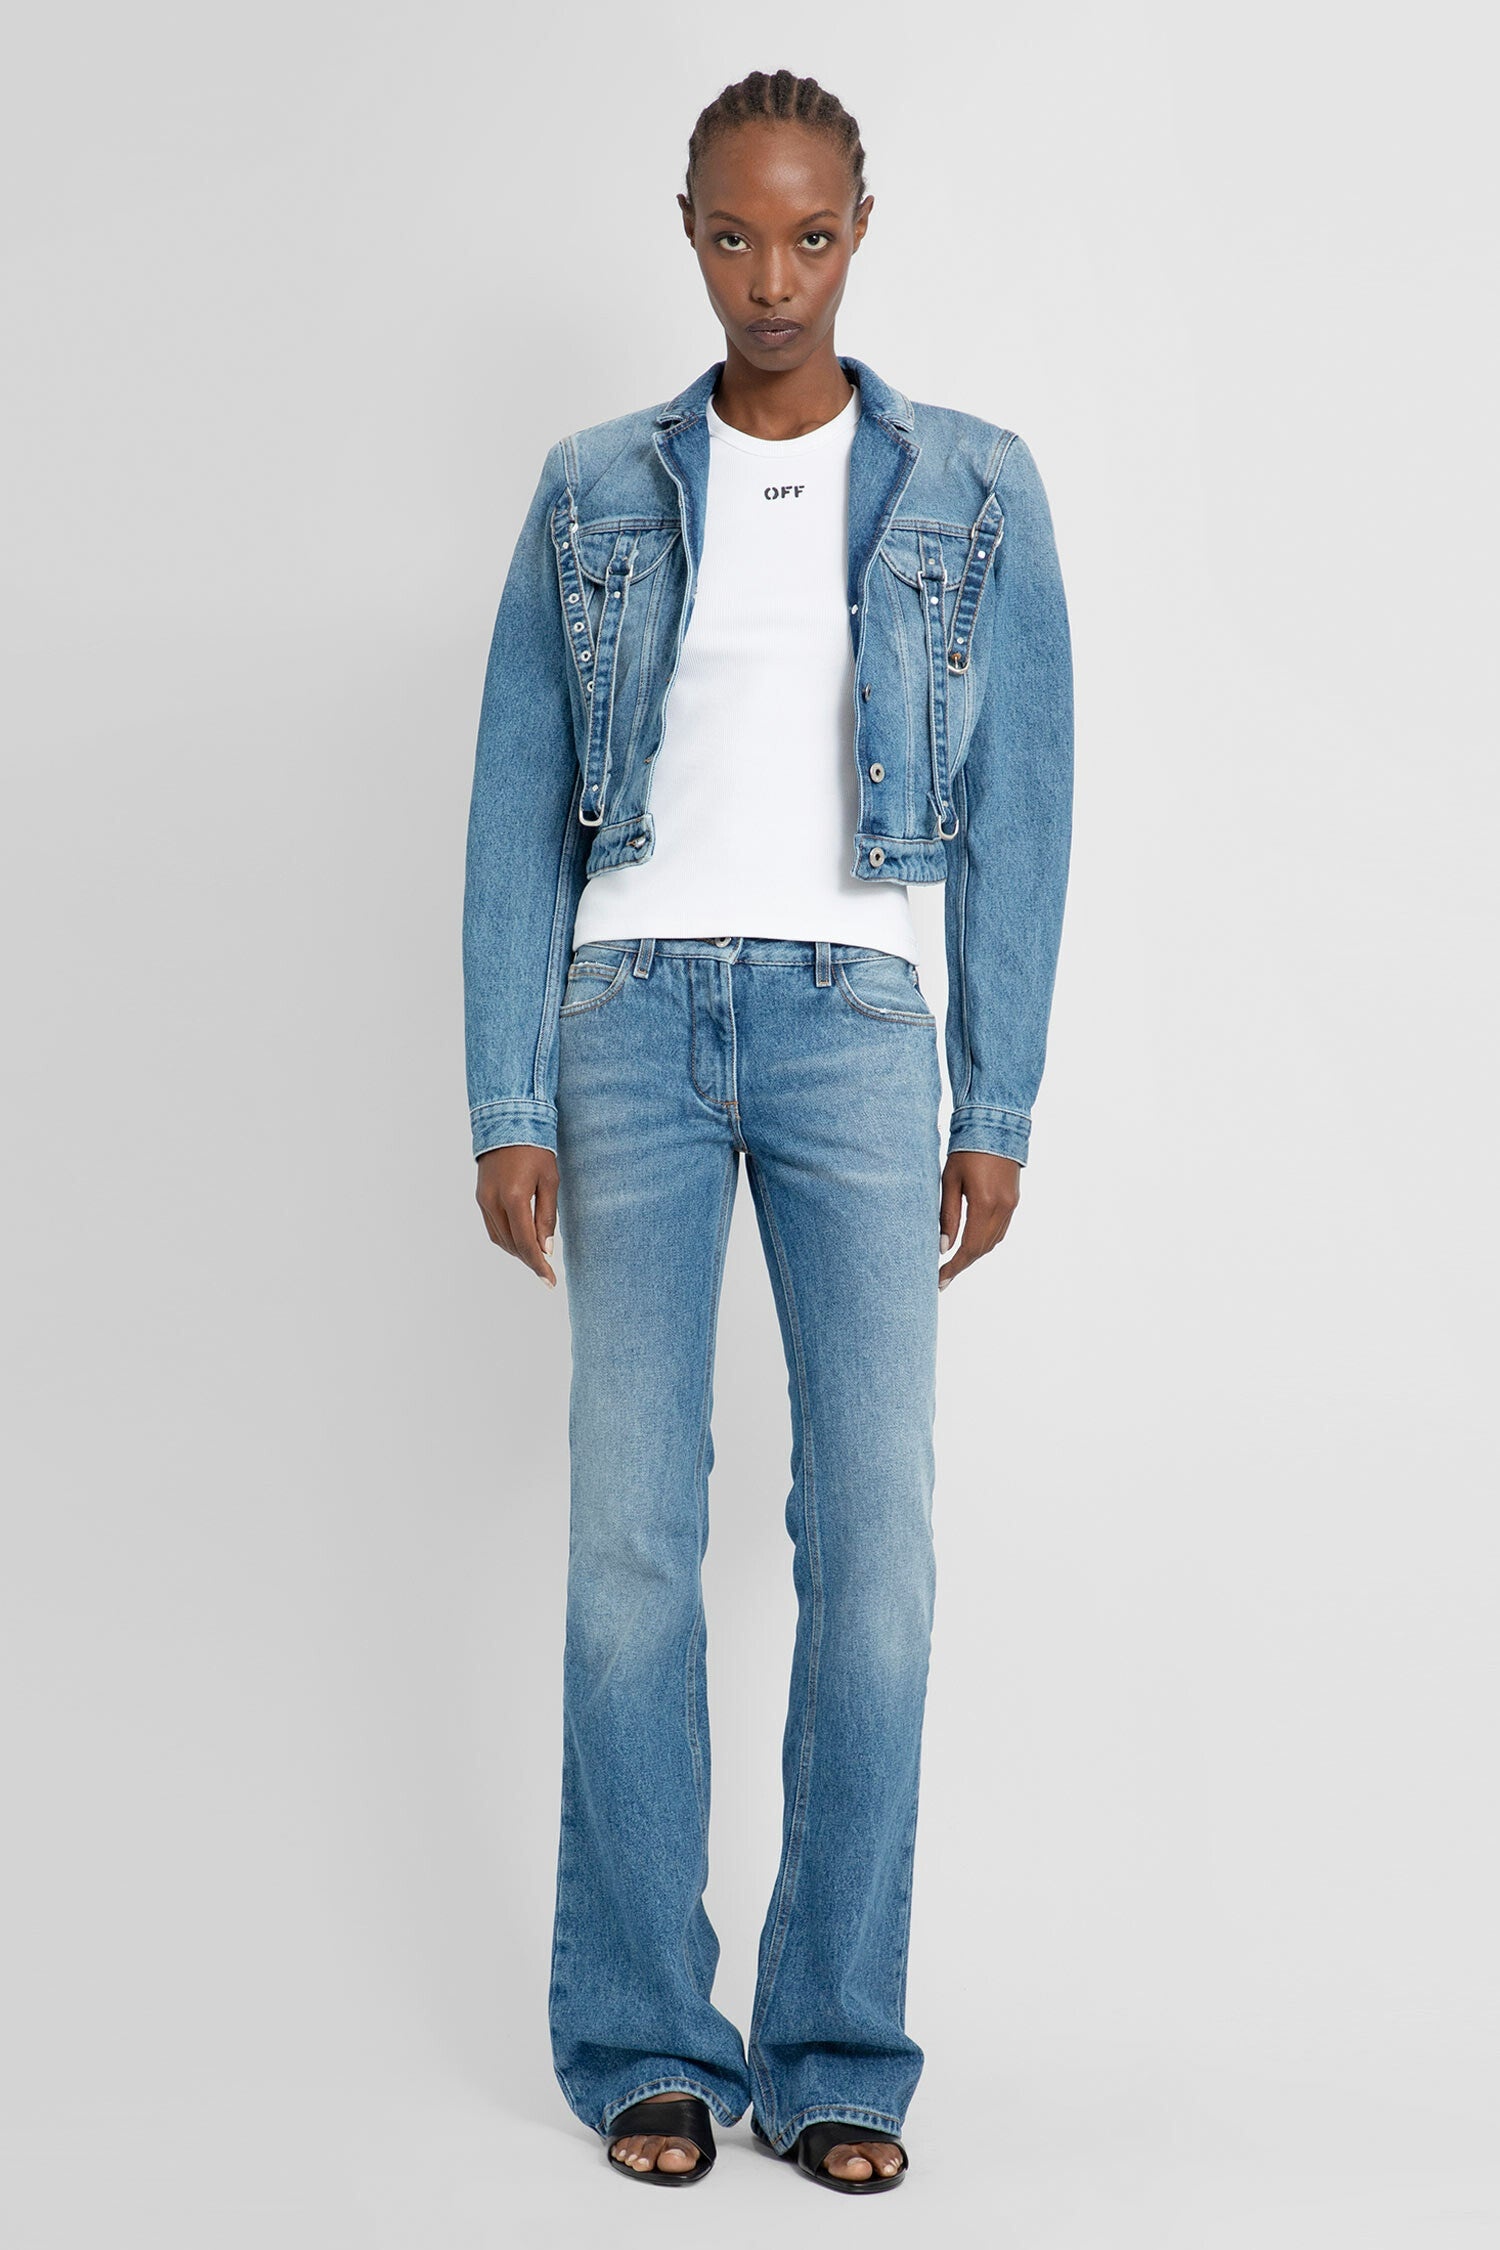 OFF-WHITE WOMAN BLUE JACKETS - 5